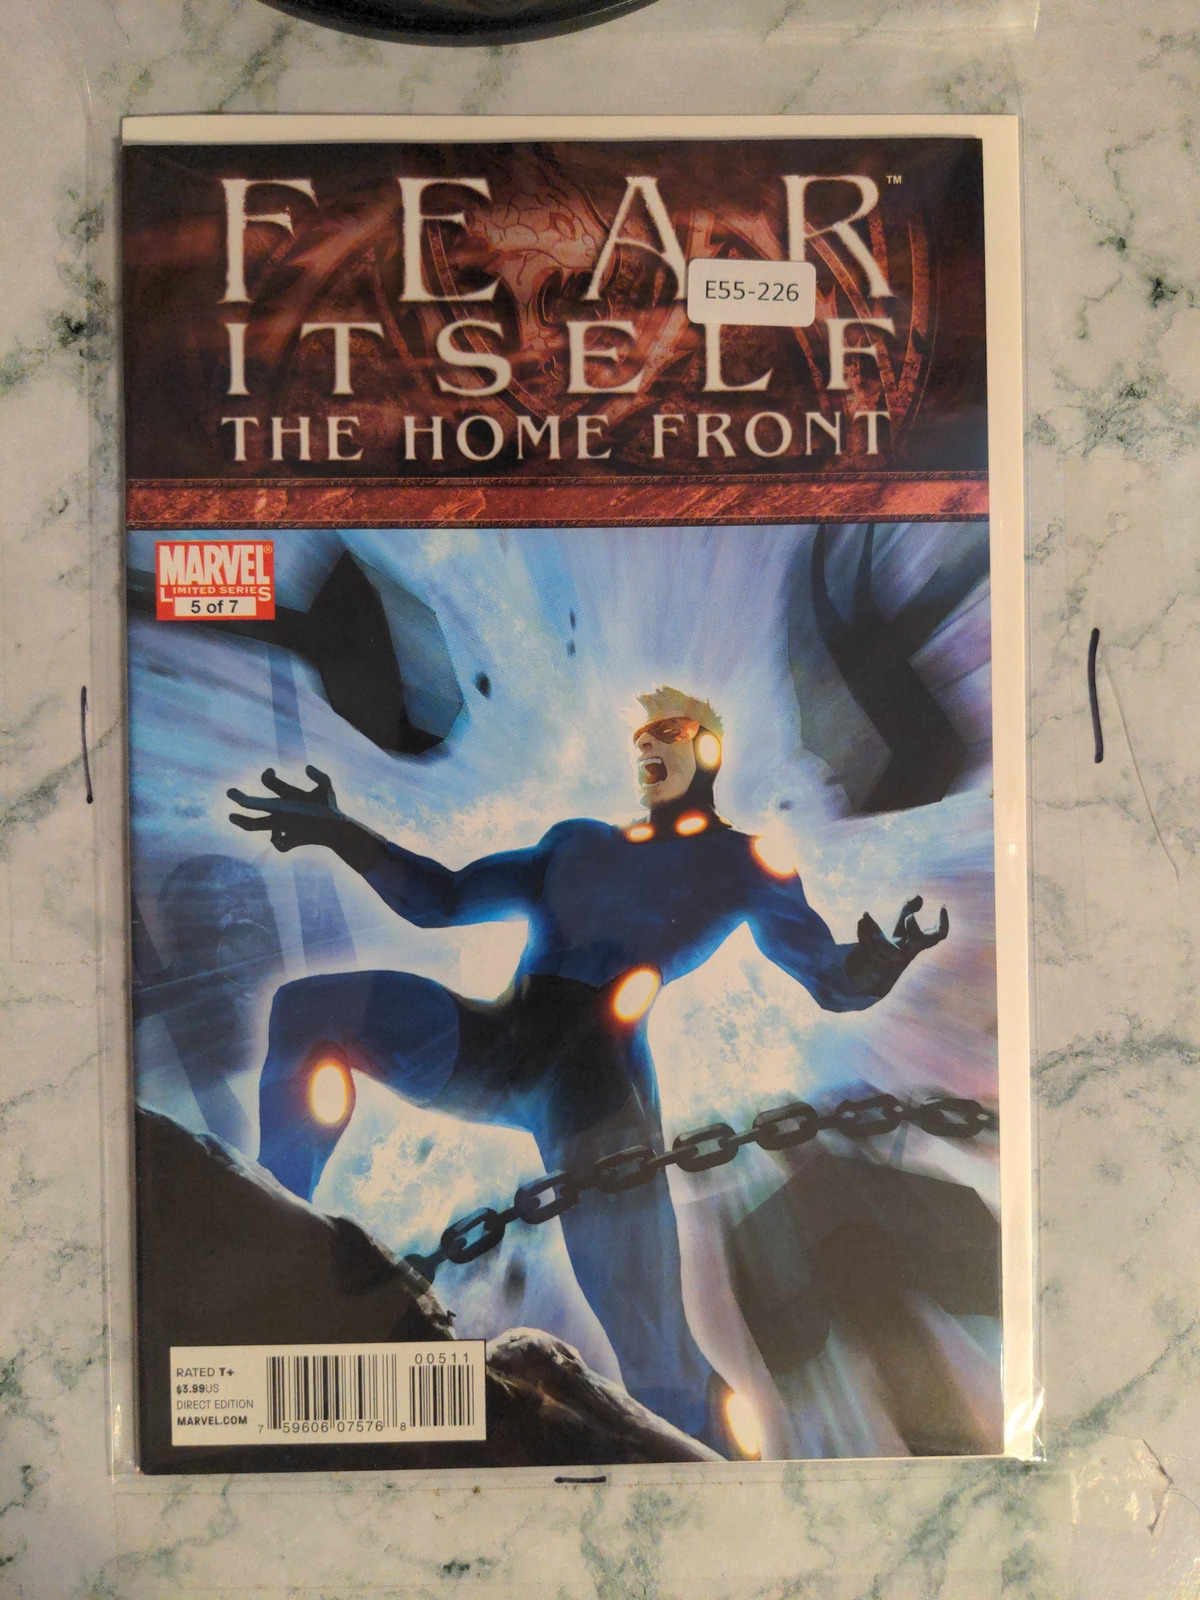 FEAR ITSELF: THE HOME FRONT #5 9.0 MARVEL COMIC BOOK E55-226